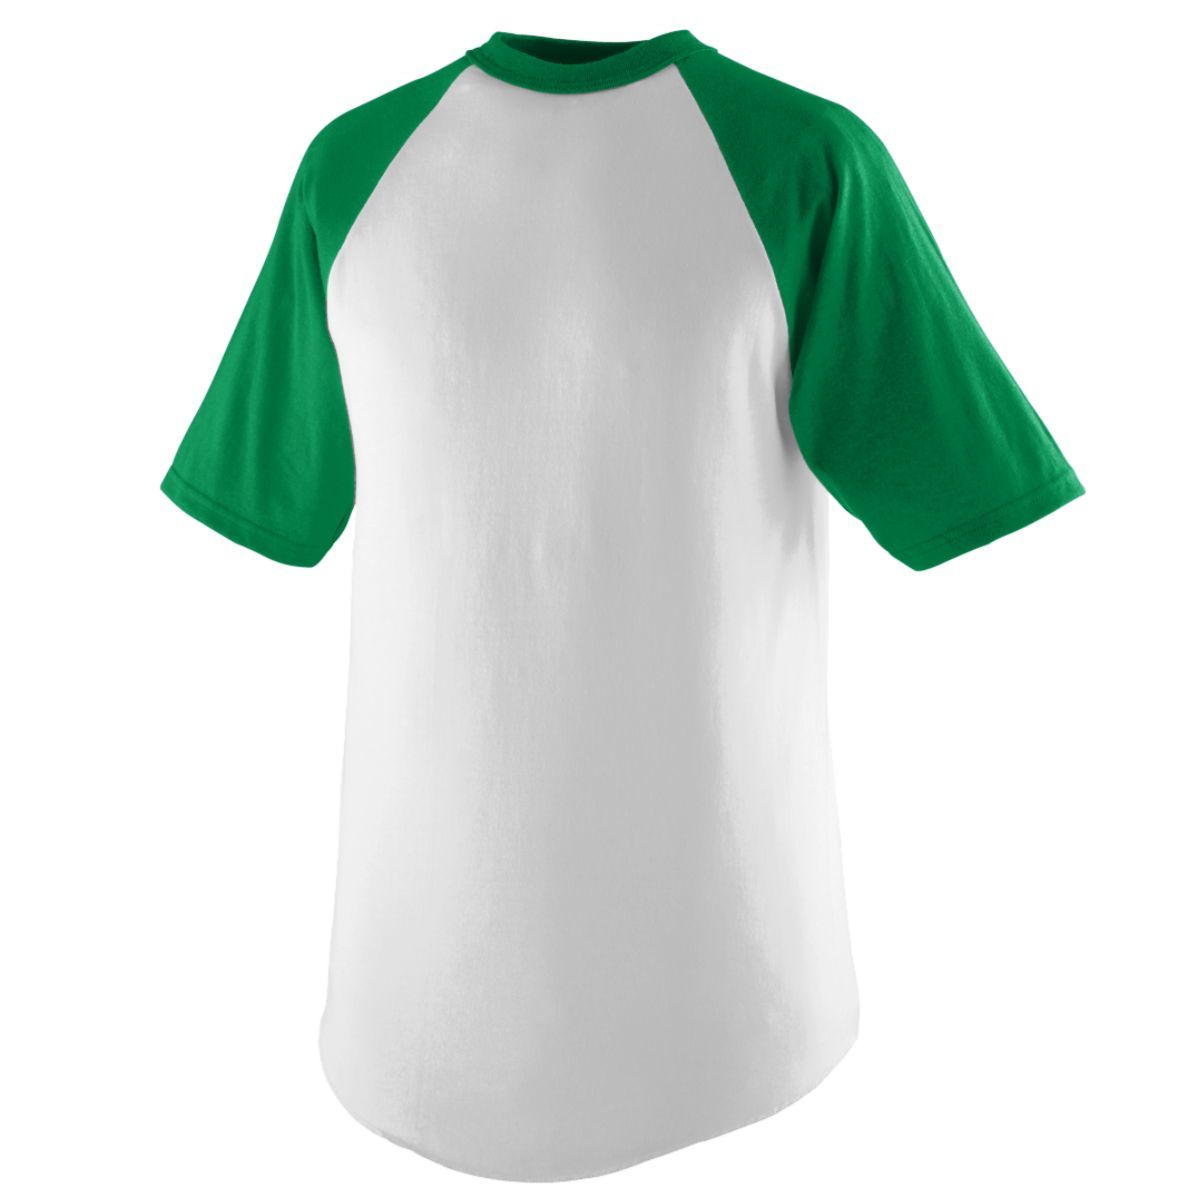 Augusta Sportswear Youth Short Sleeve Baseball Jersey in White/Kelly  -Part of the Youth, Youth-Jersey, Augusta-Products, Baseball, Shirts, All-Sports, All-Sports-1 product lines at KanaleyCreations.com